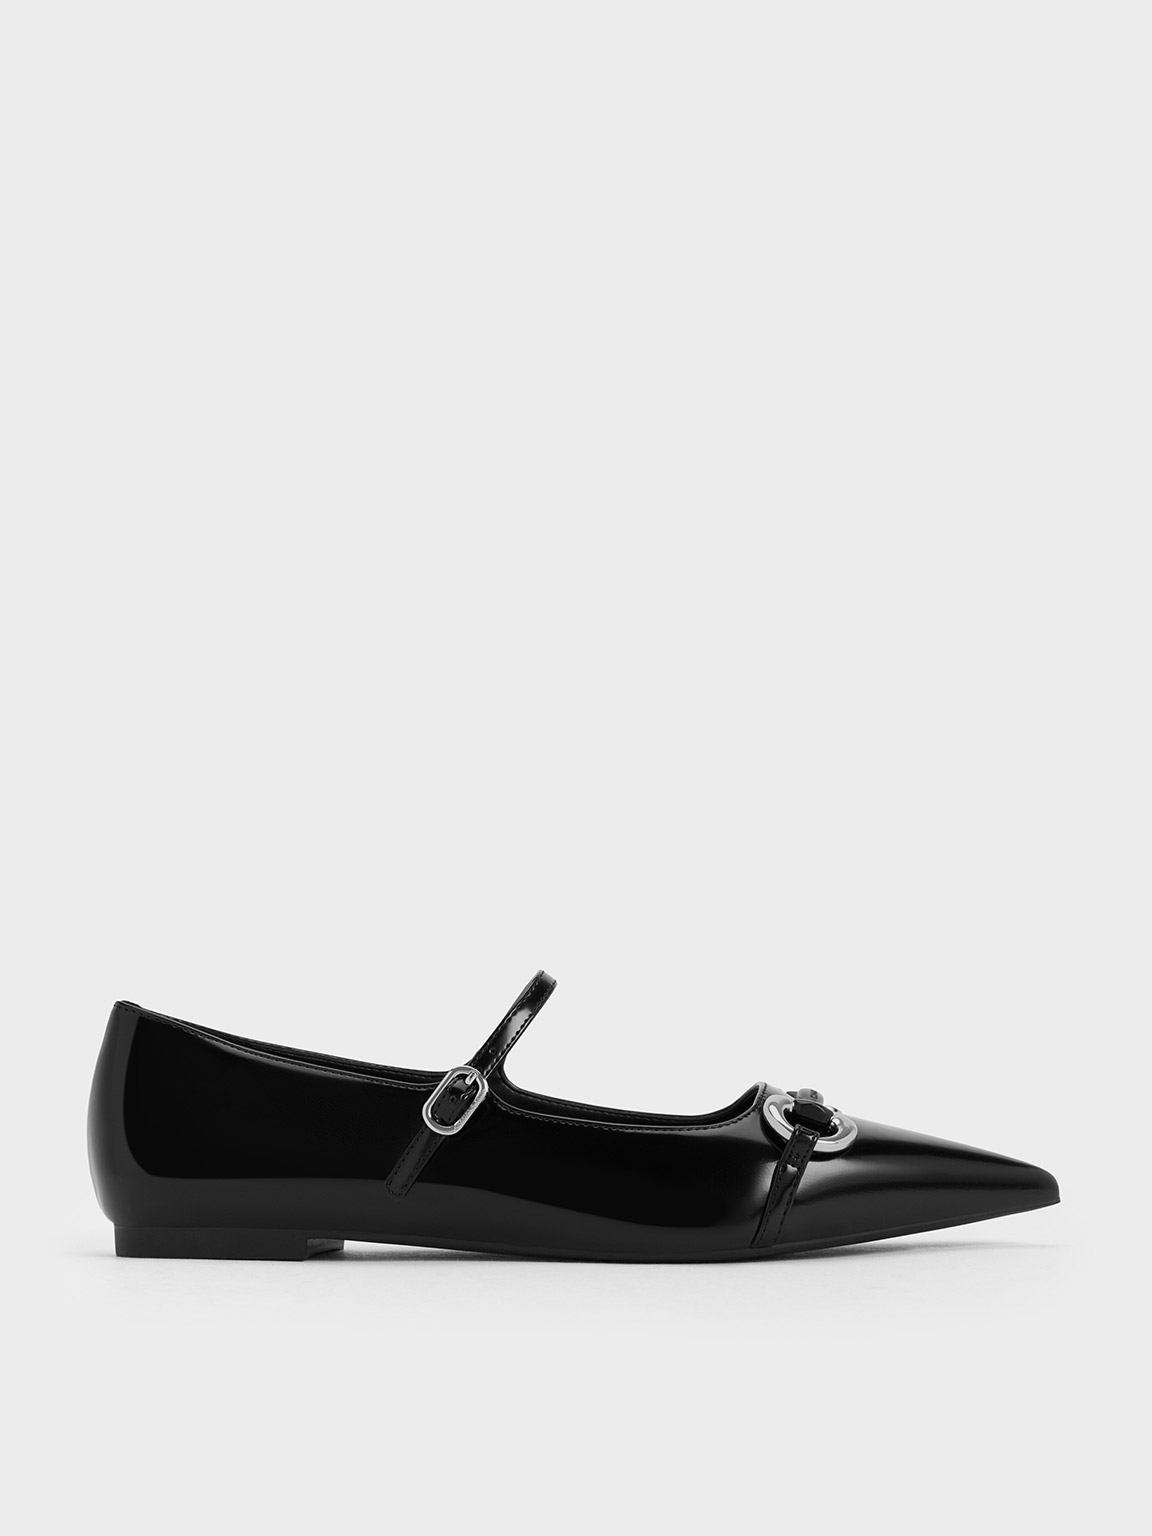 Black Box Metallic Accent Pointed-Toe Mary Janes - CHARLES & KEITH SG